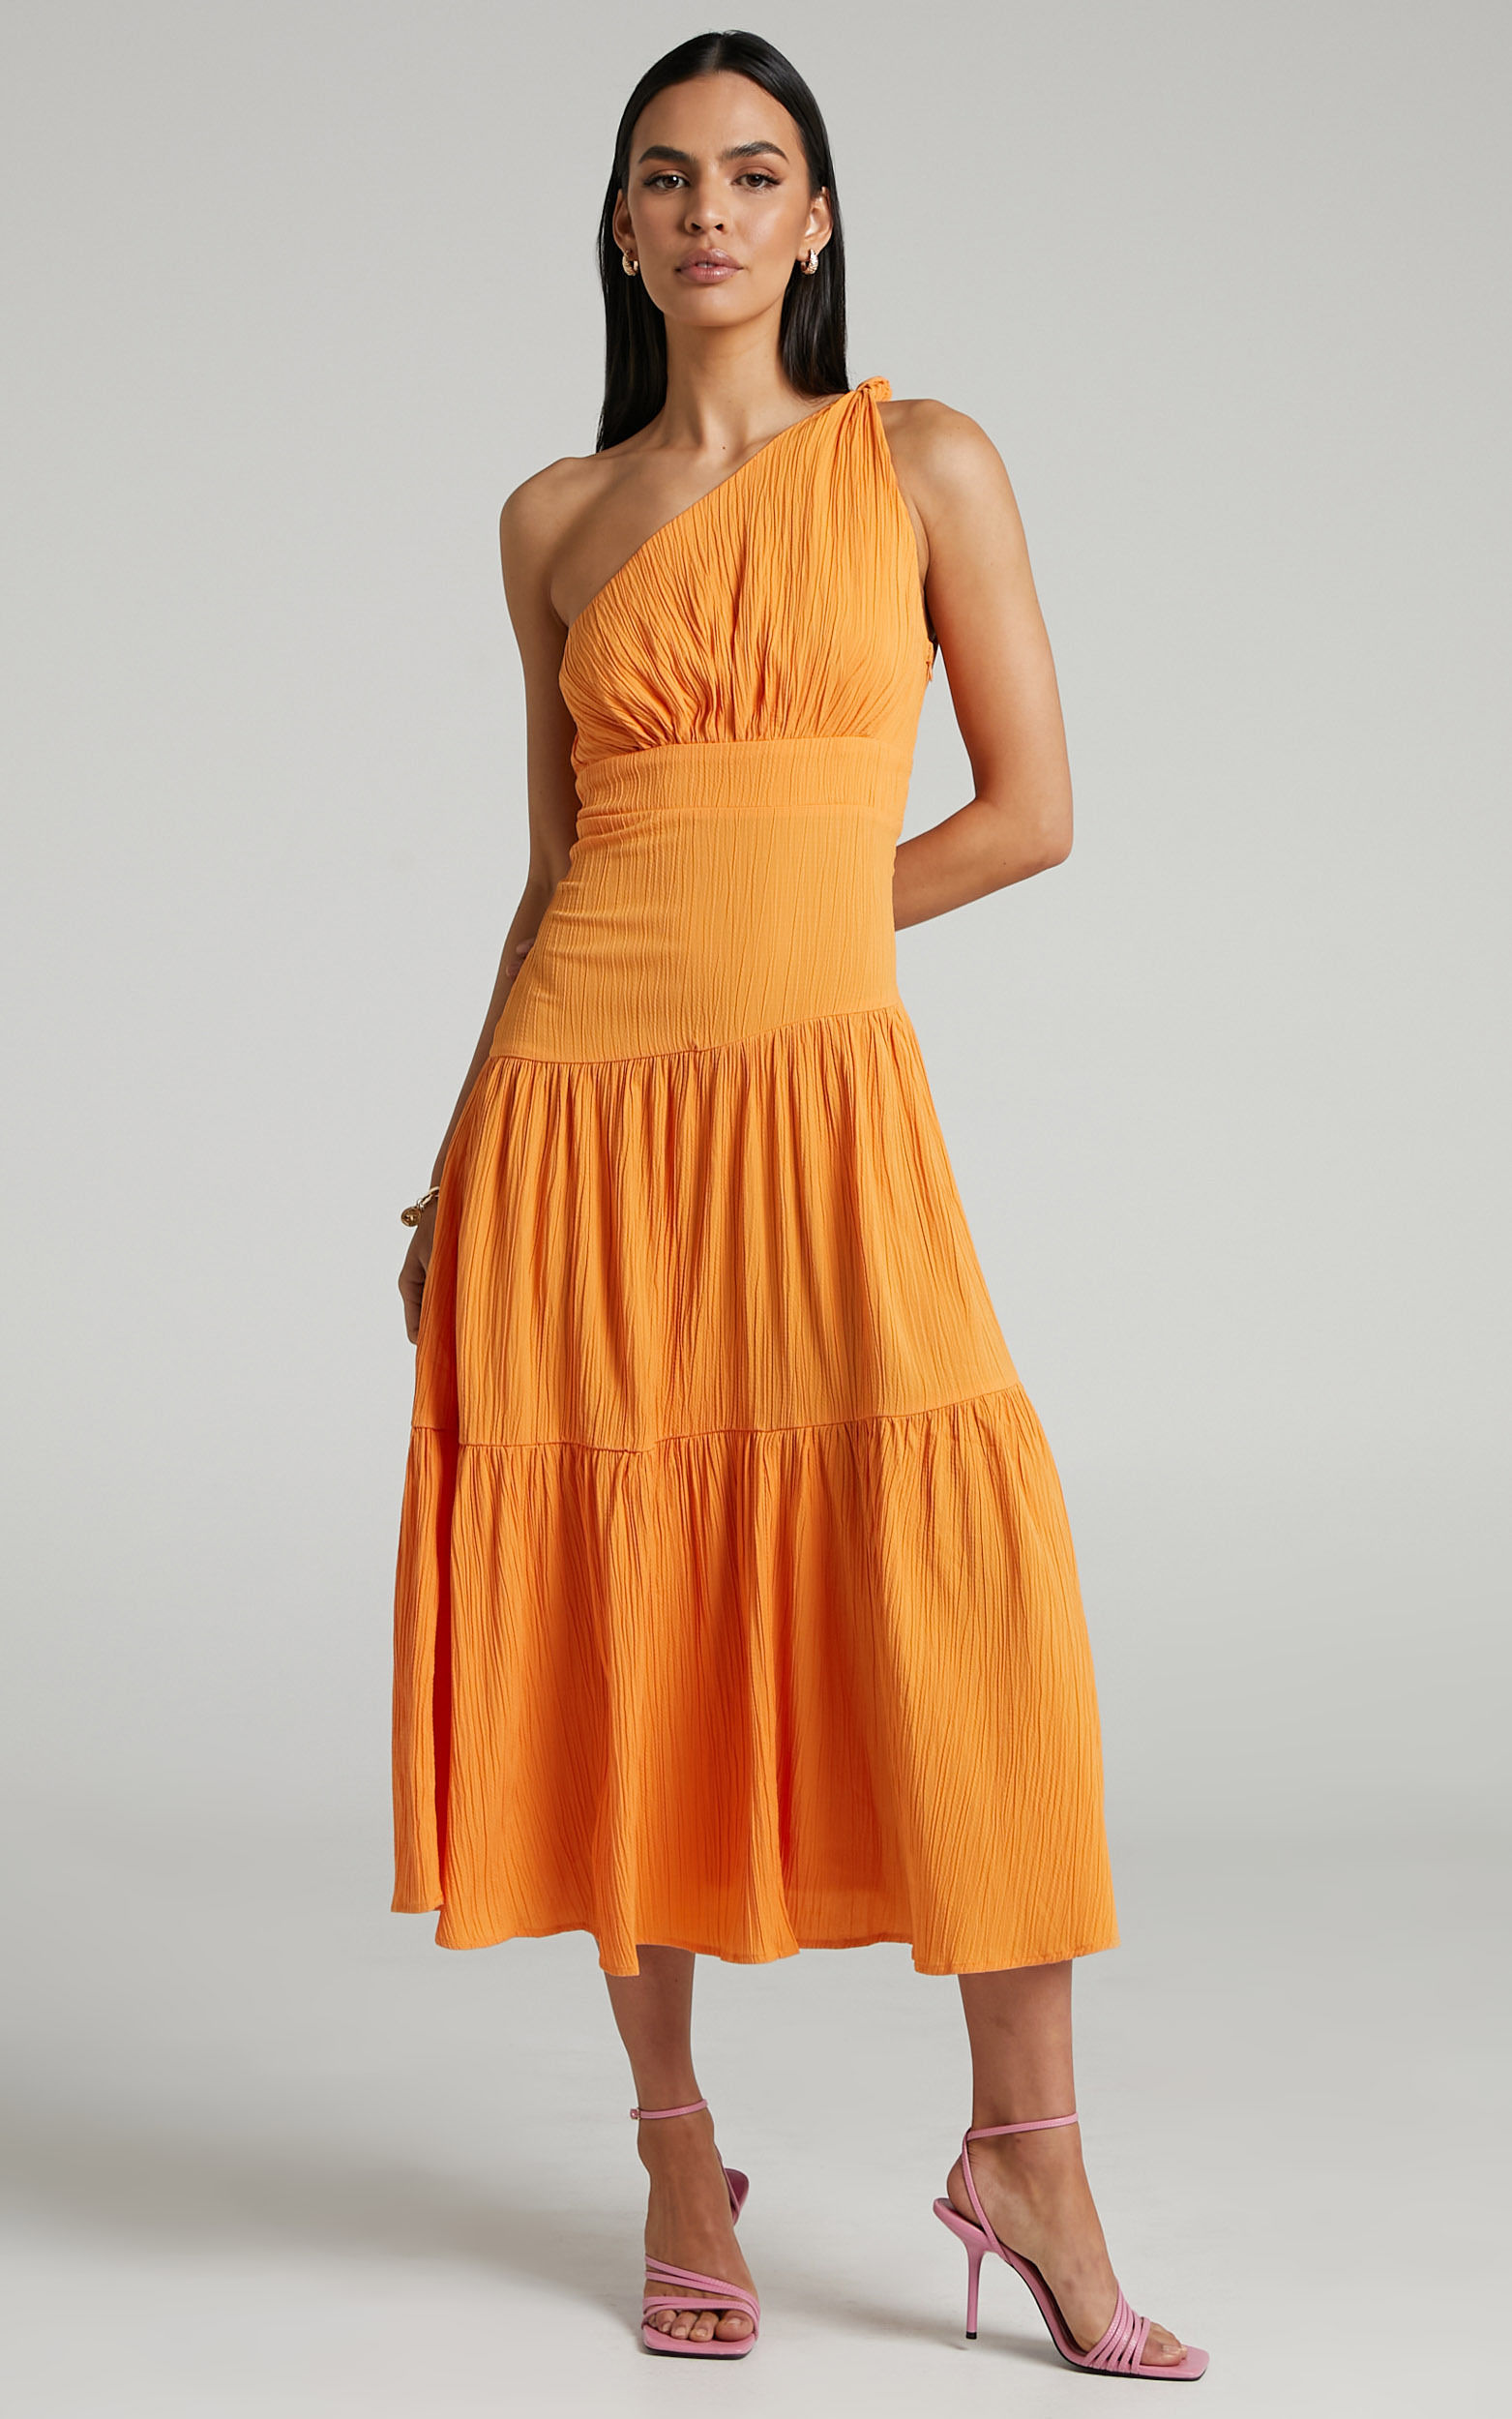 Celestia Midi Dress - Tiered One Shoulder Dress in Mango - 06, ORG1, hi-res image number null